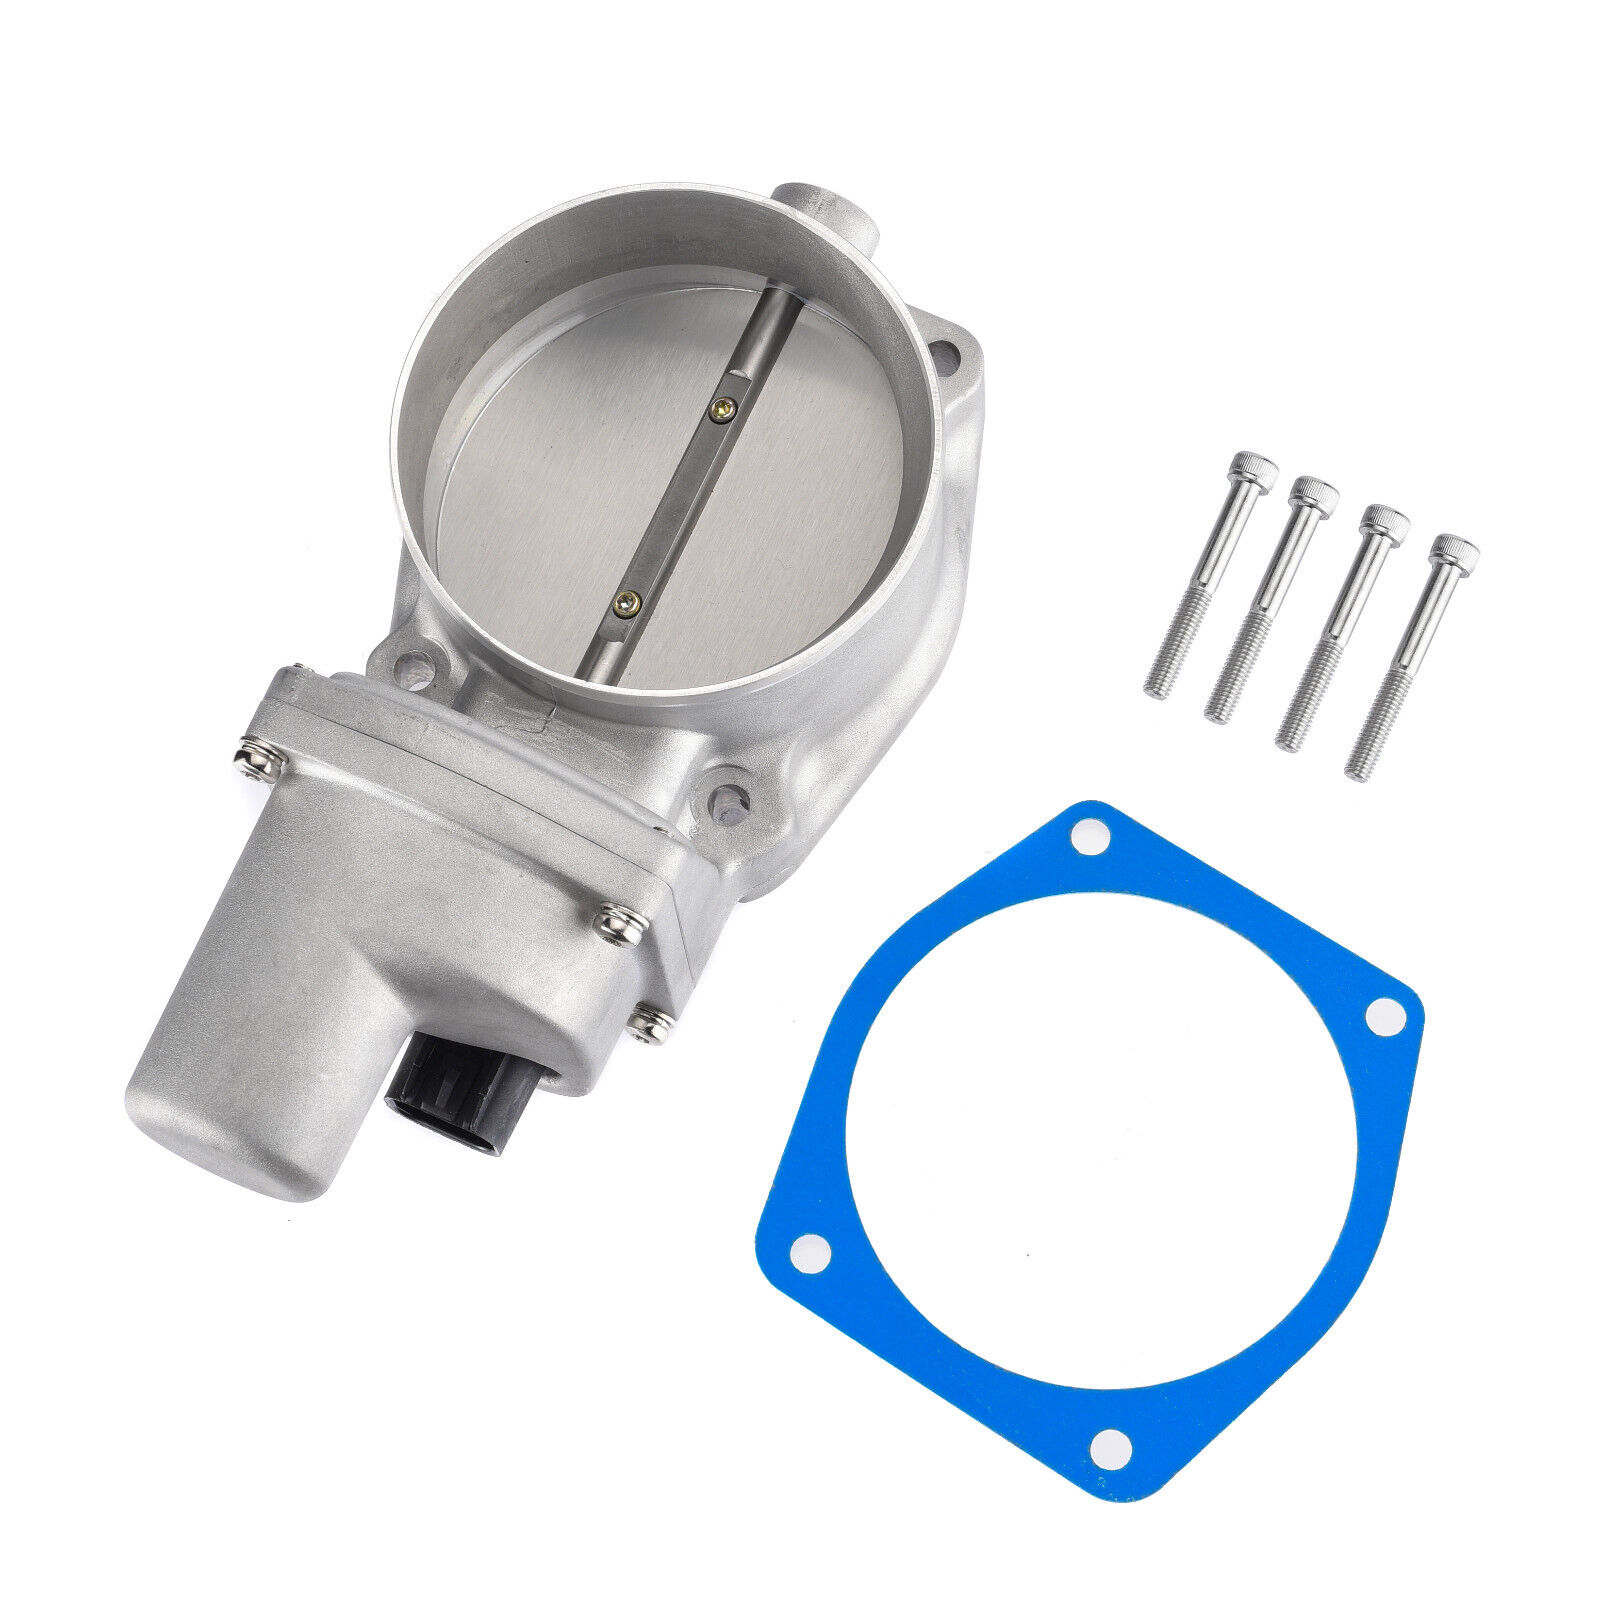 DBW 102mm throttle body (12570790）Silver Blade for Ls2 Corvette Z06 GTO CTS G8